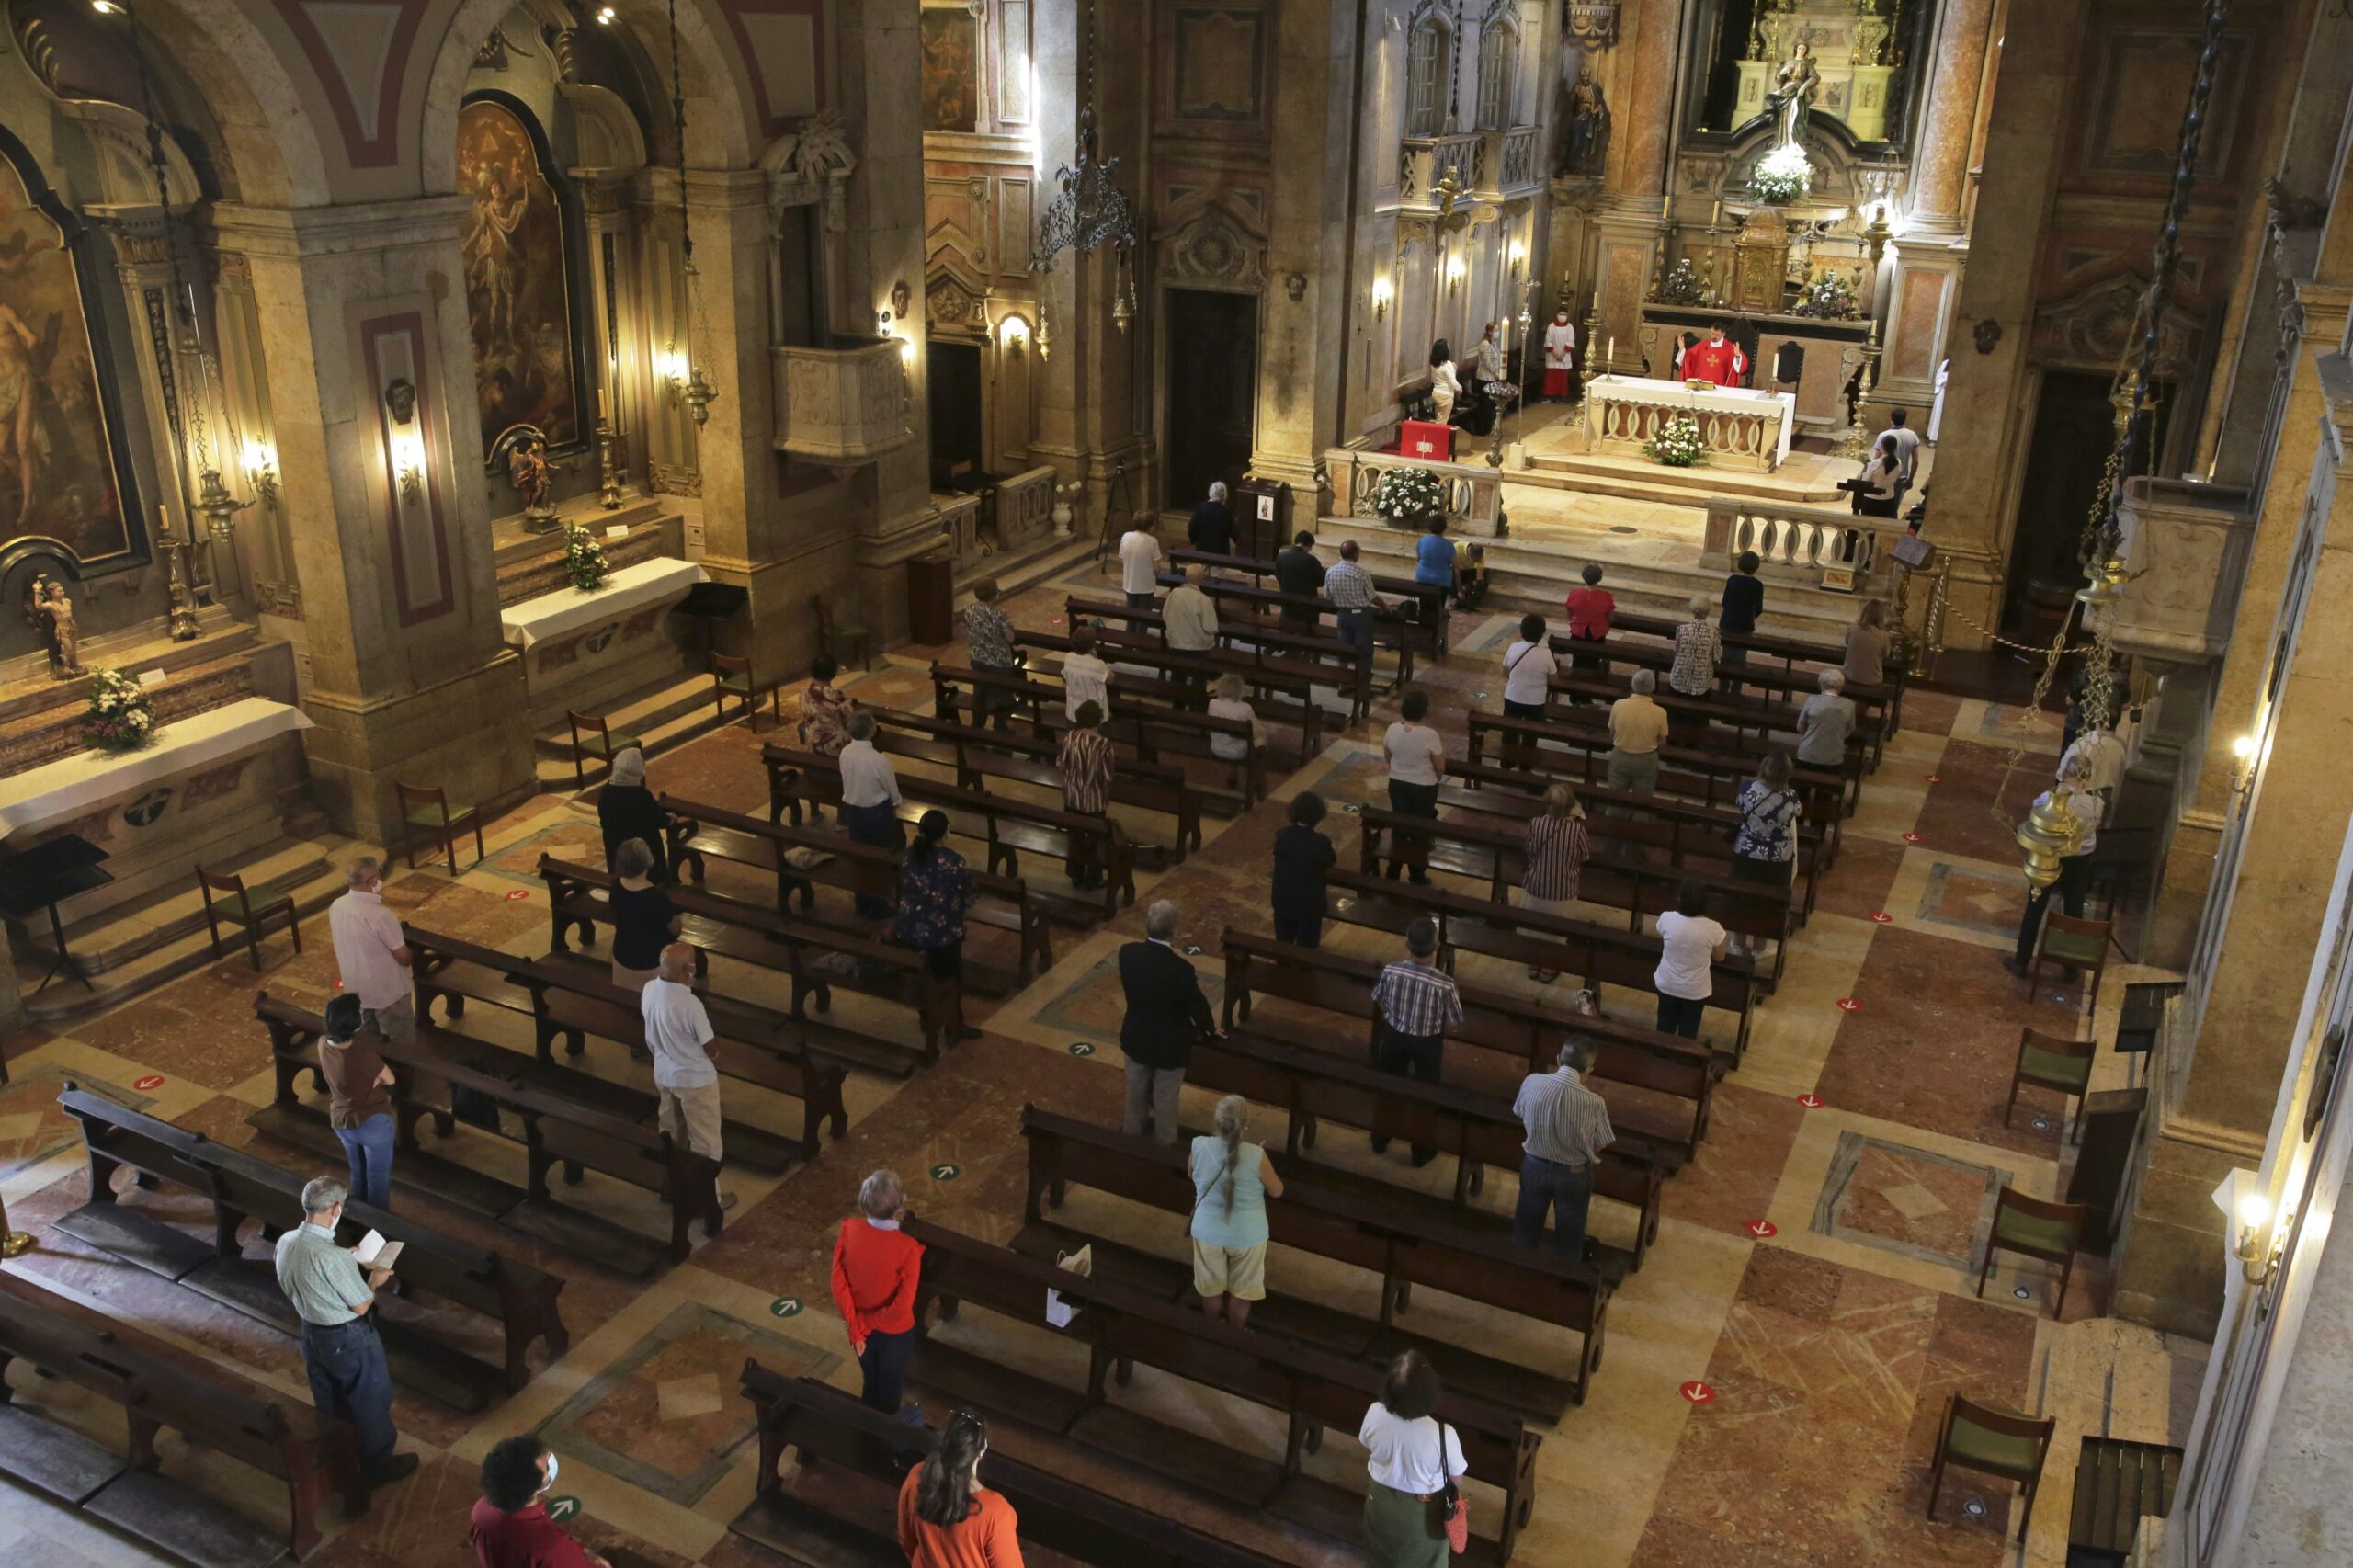 parishioners attend mass with significant space between them